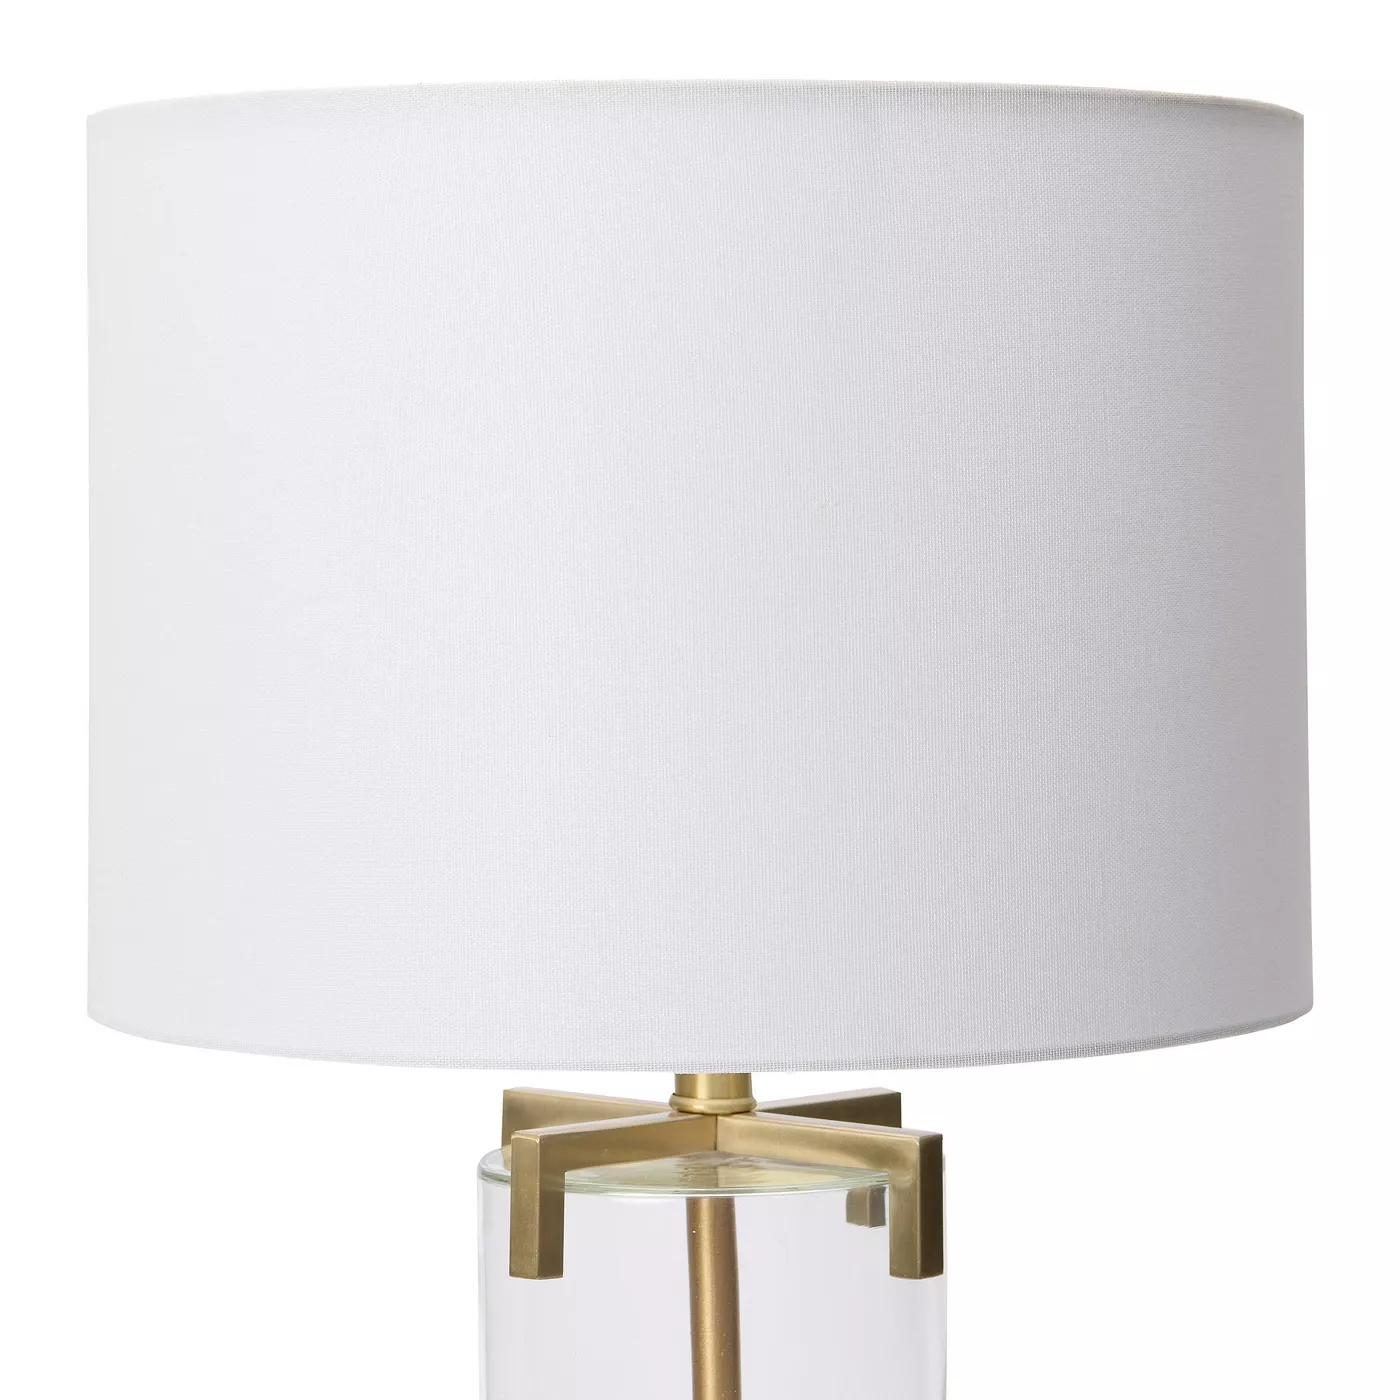 26.5" Brushed Gold & Glass Table Lamp - Image 1